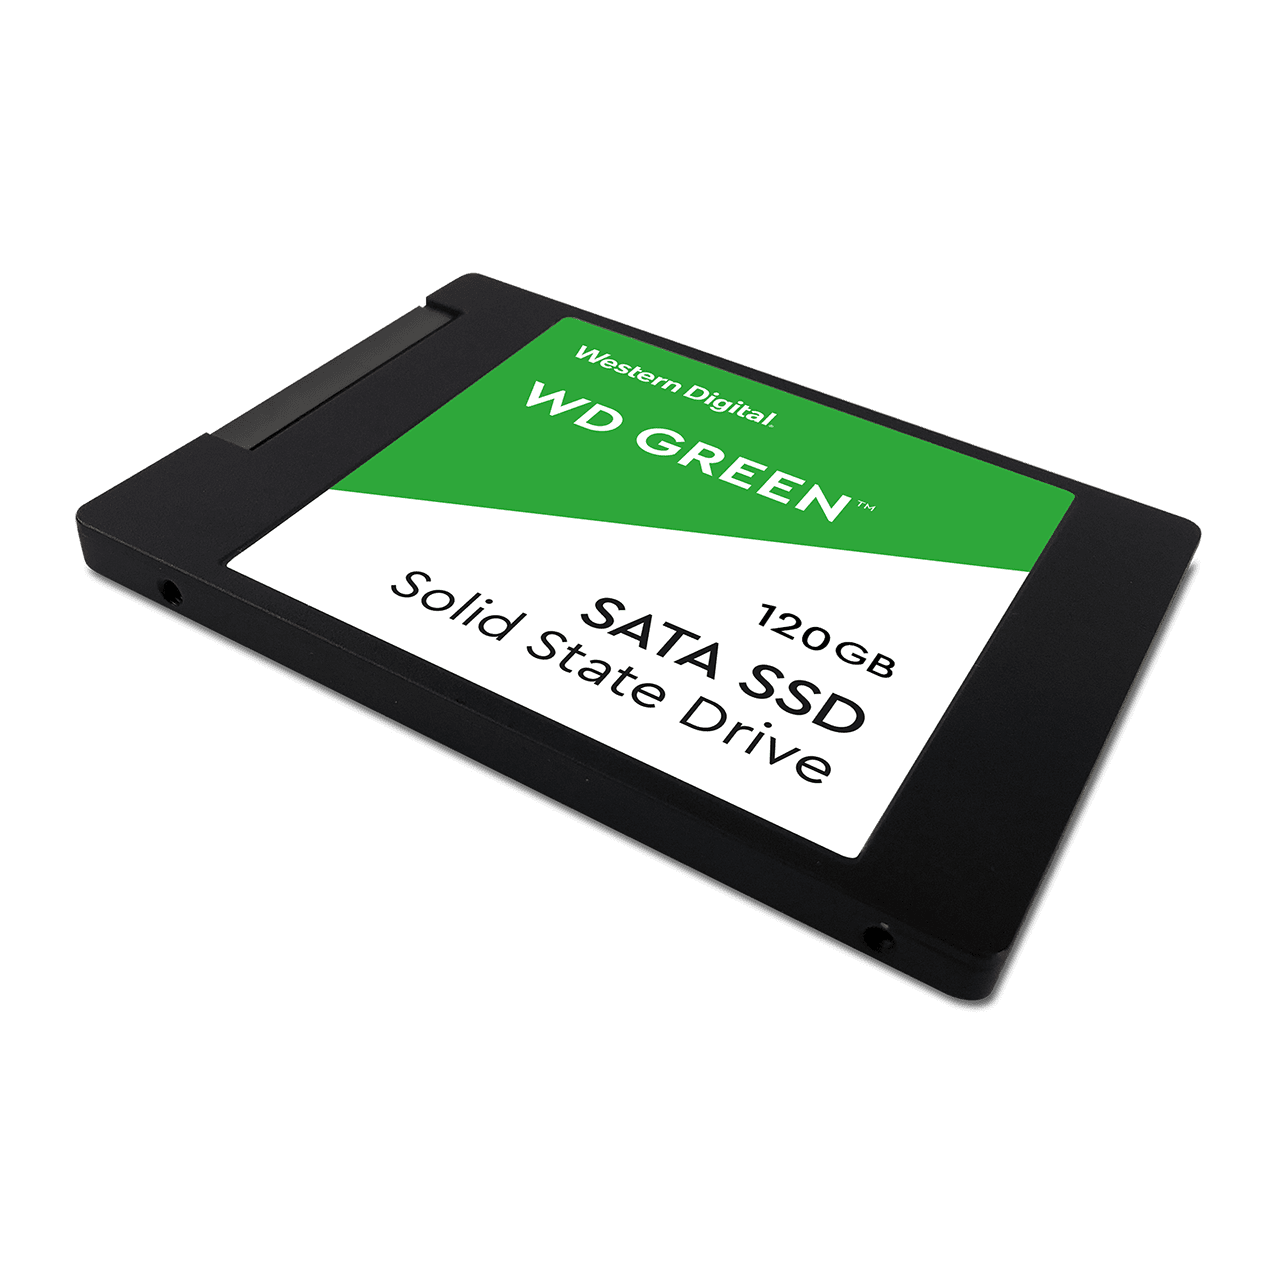 WD SSD Solid State Drive Background PNG Image